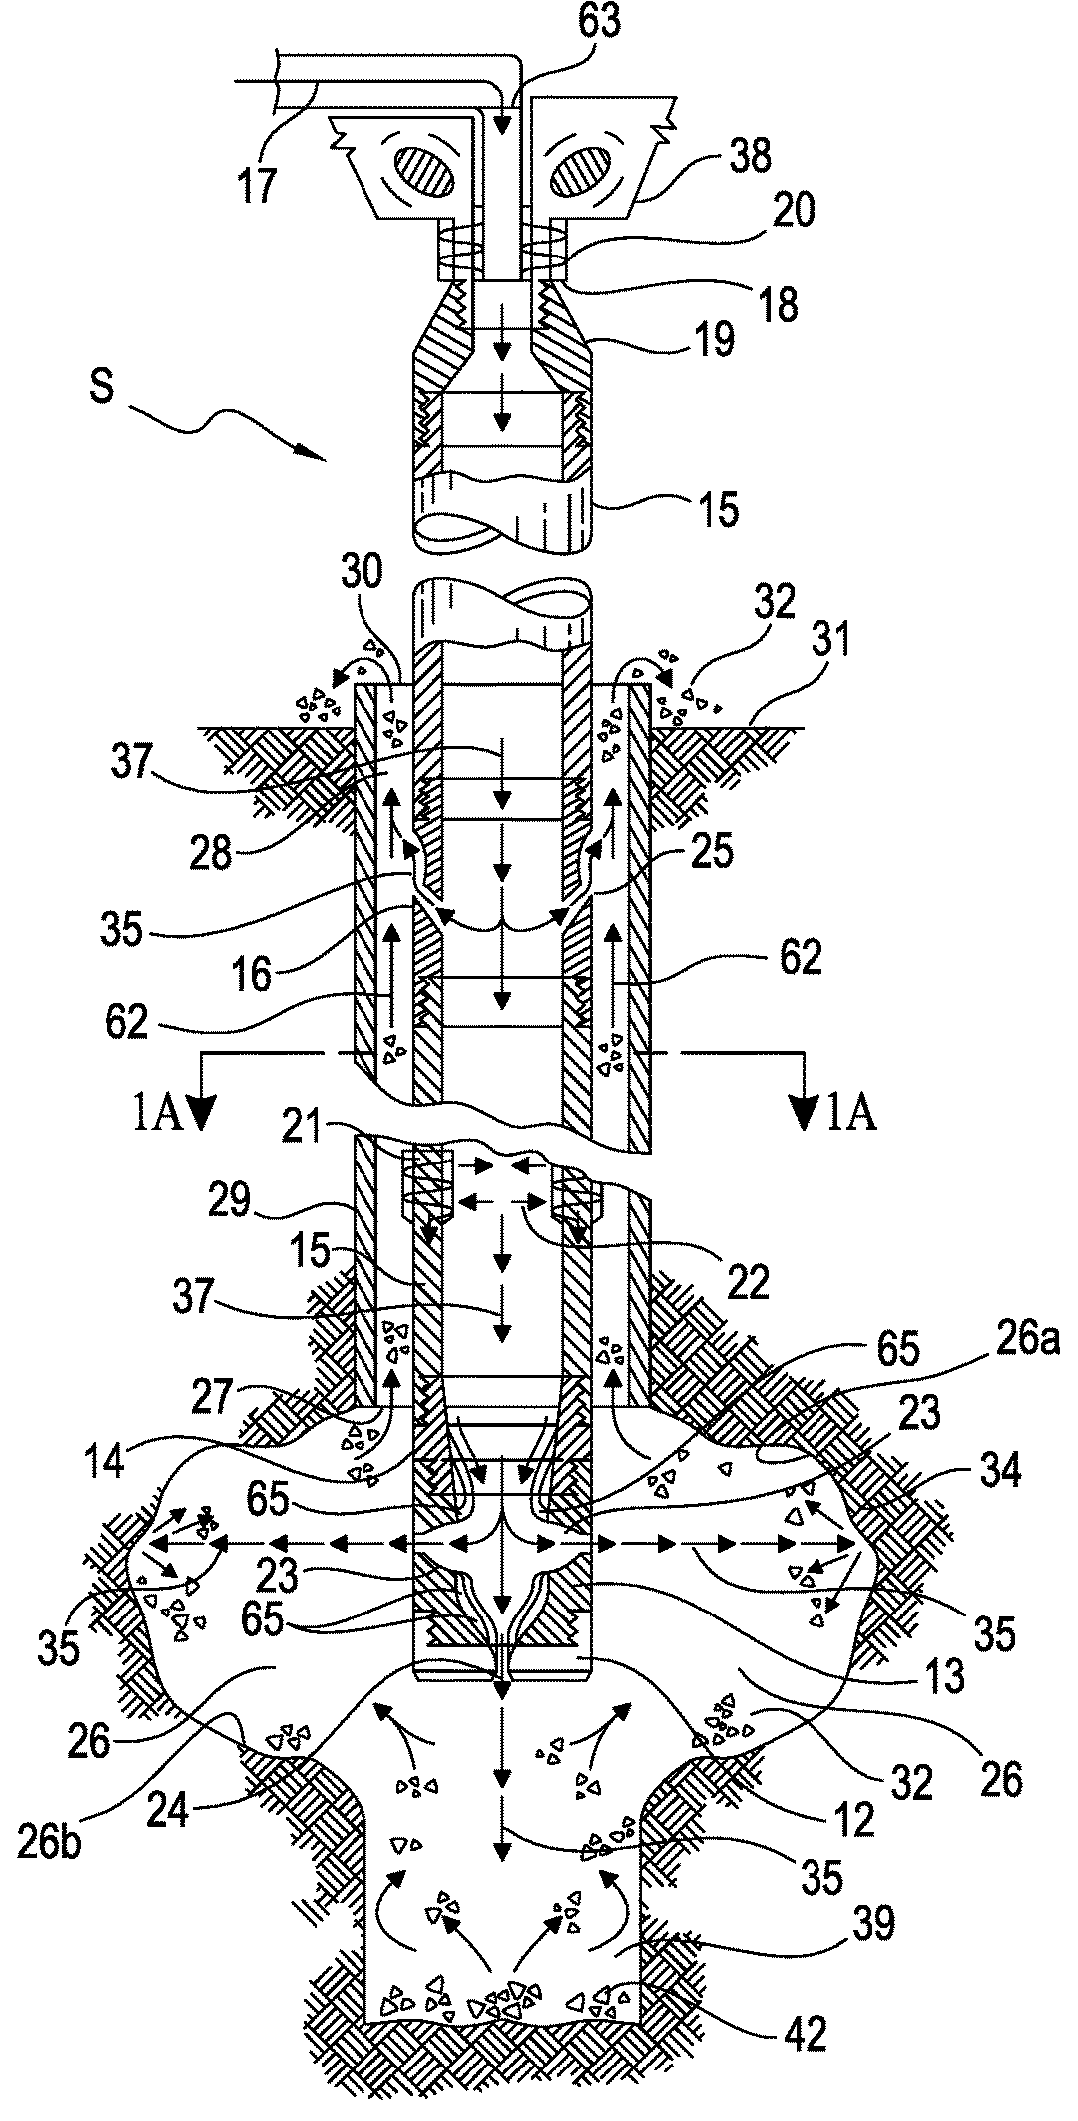 Low-frequency pulsing sonic and hydraulic mining system